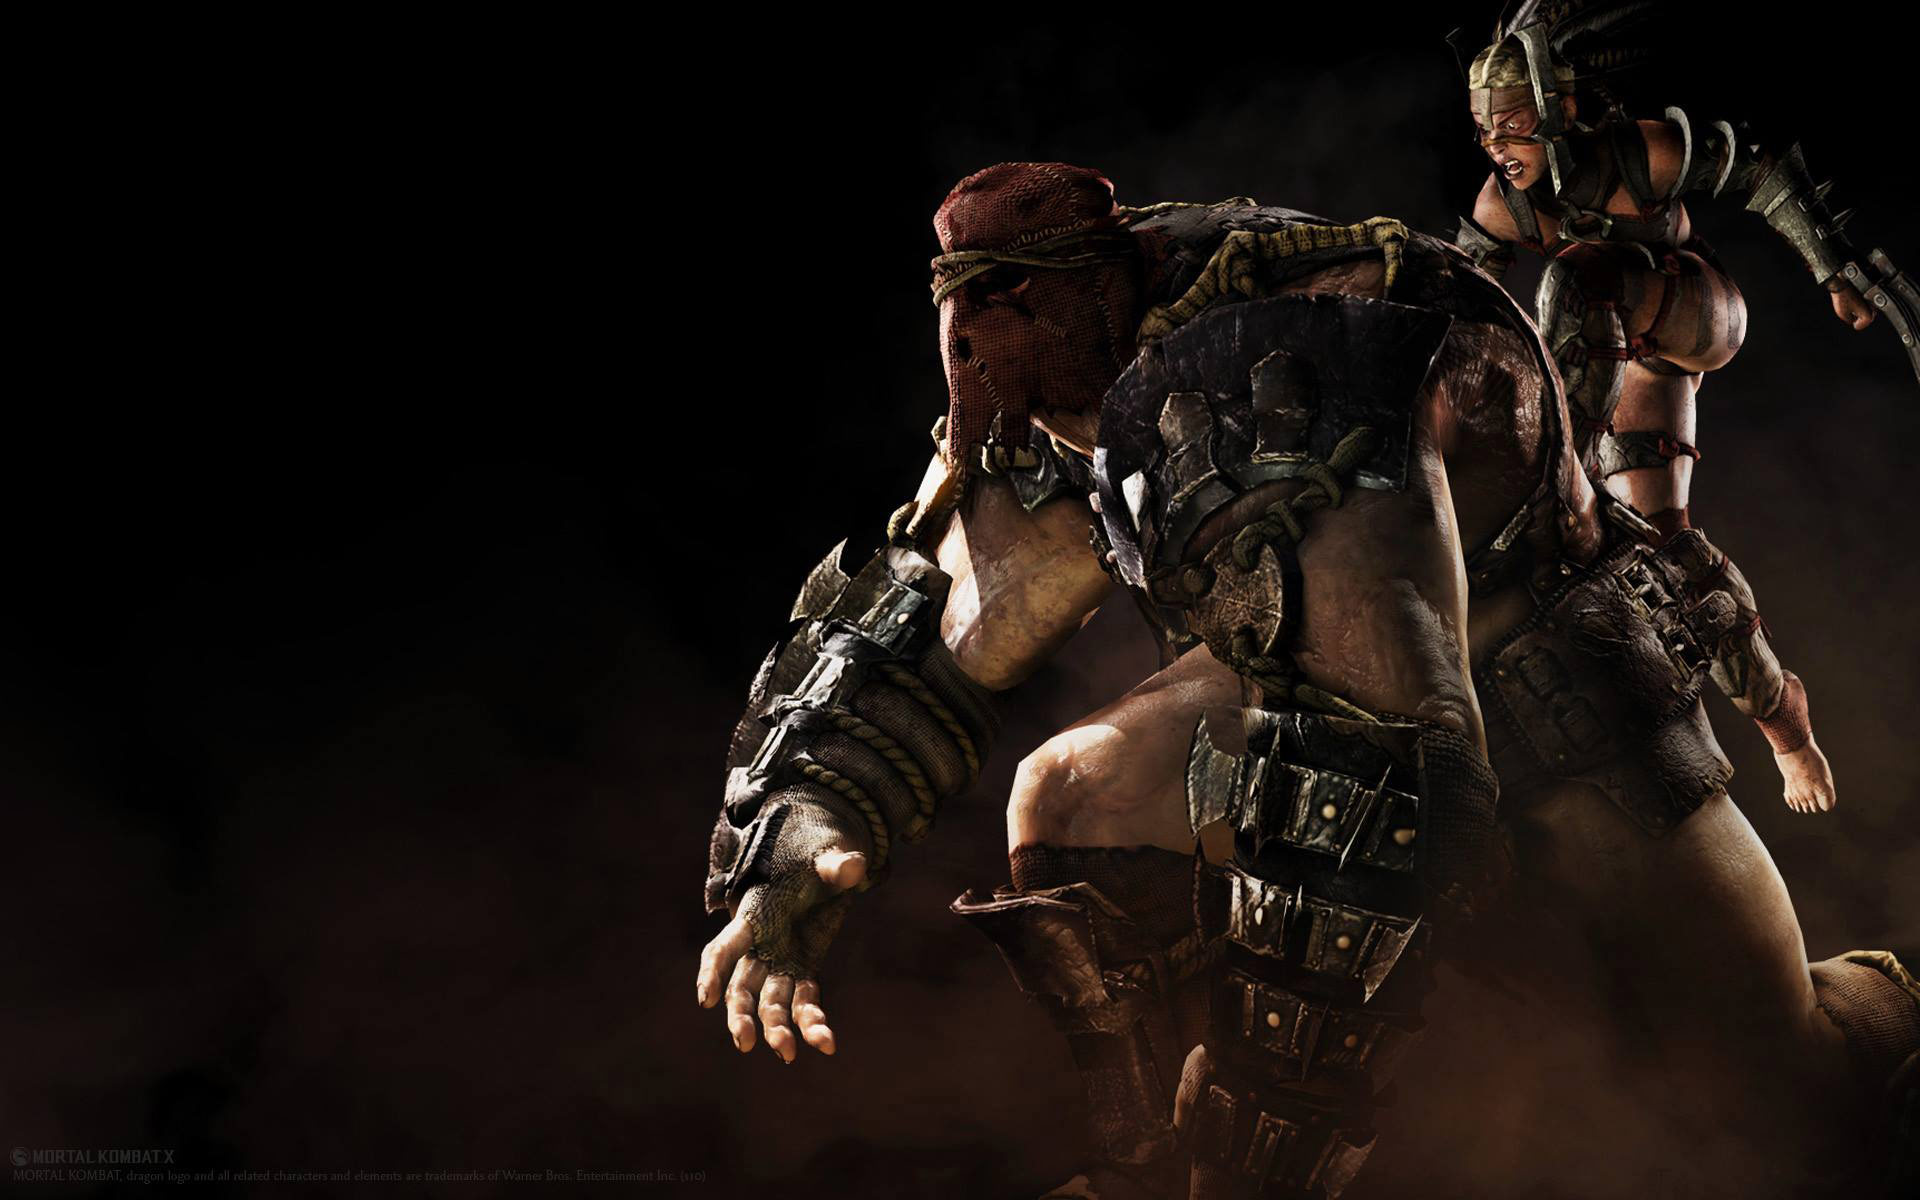 Characters That Have Been Revealed So Far Courtesy Of Mortal Kombat